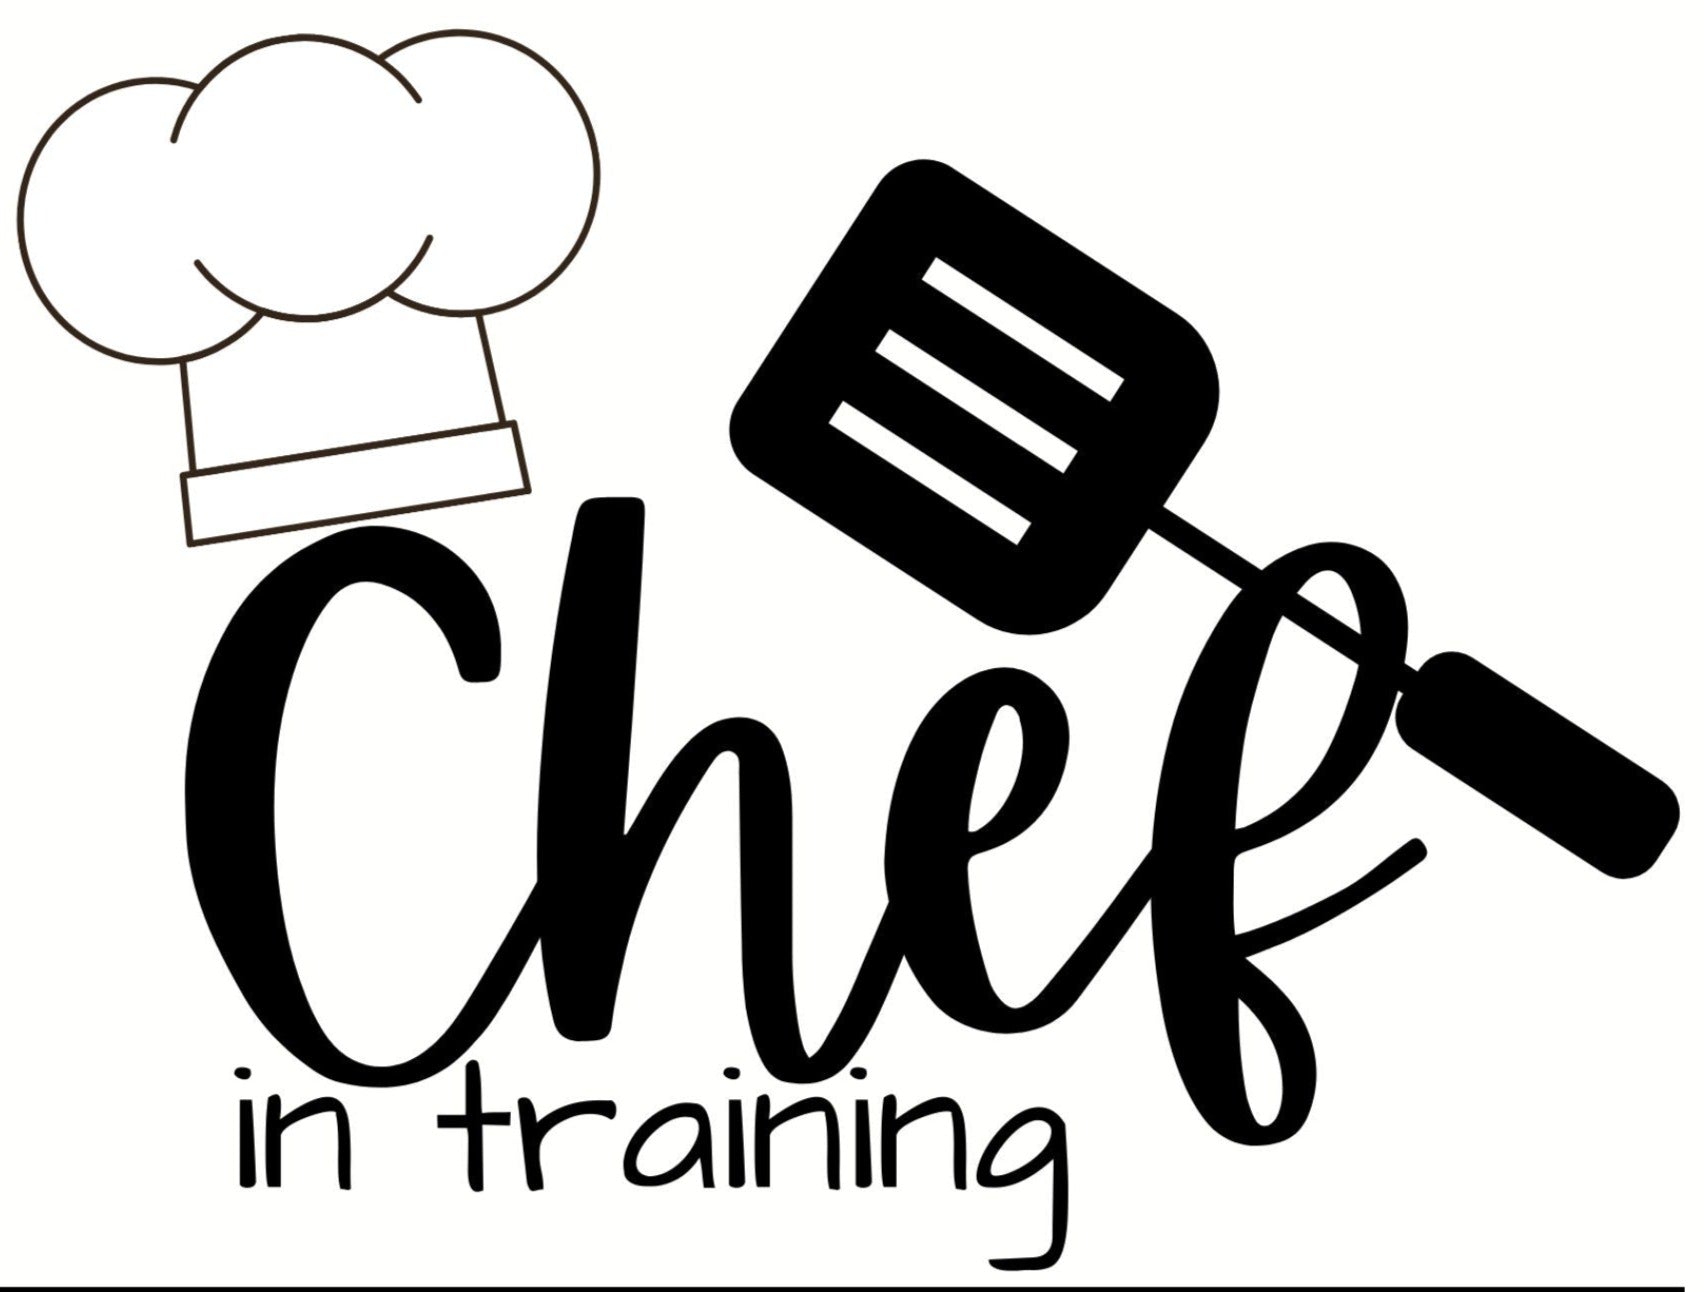 Little Chef Cuttable Design Cut File. Vector, Clipart, Digital Scrapbooking  Download, Available in JPEG, PDF, EPS, DX…